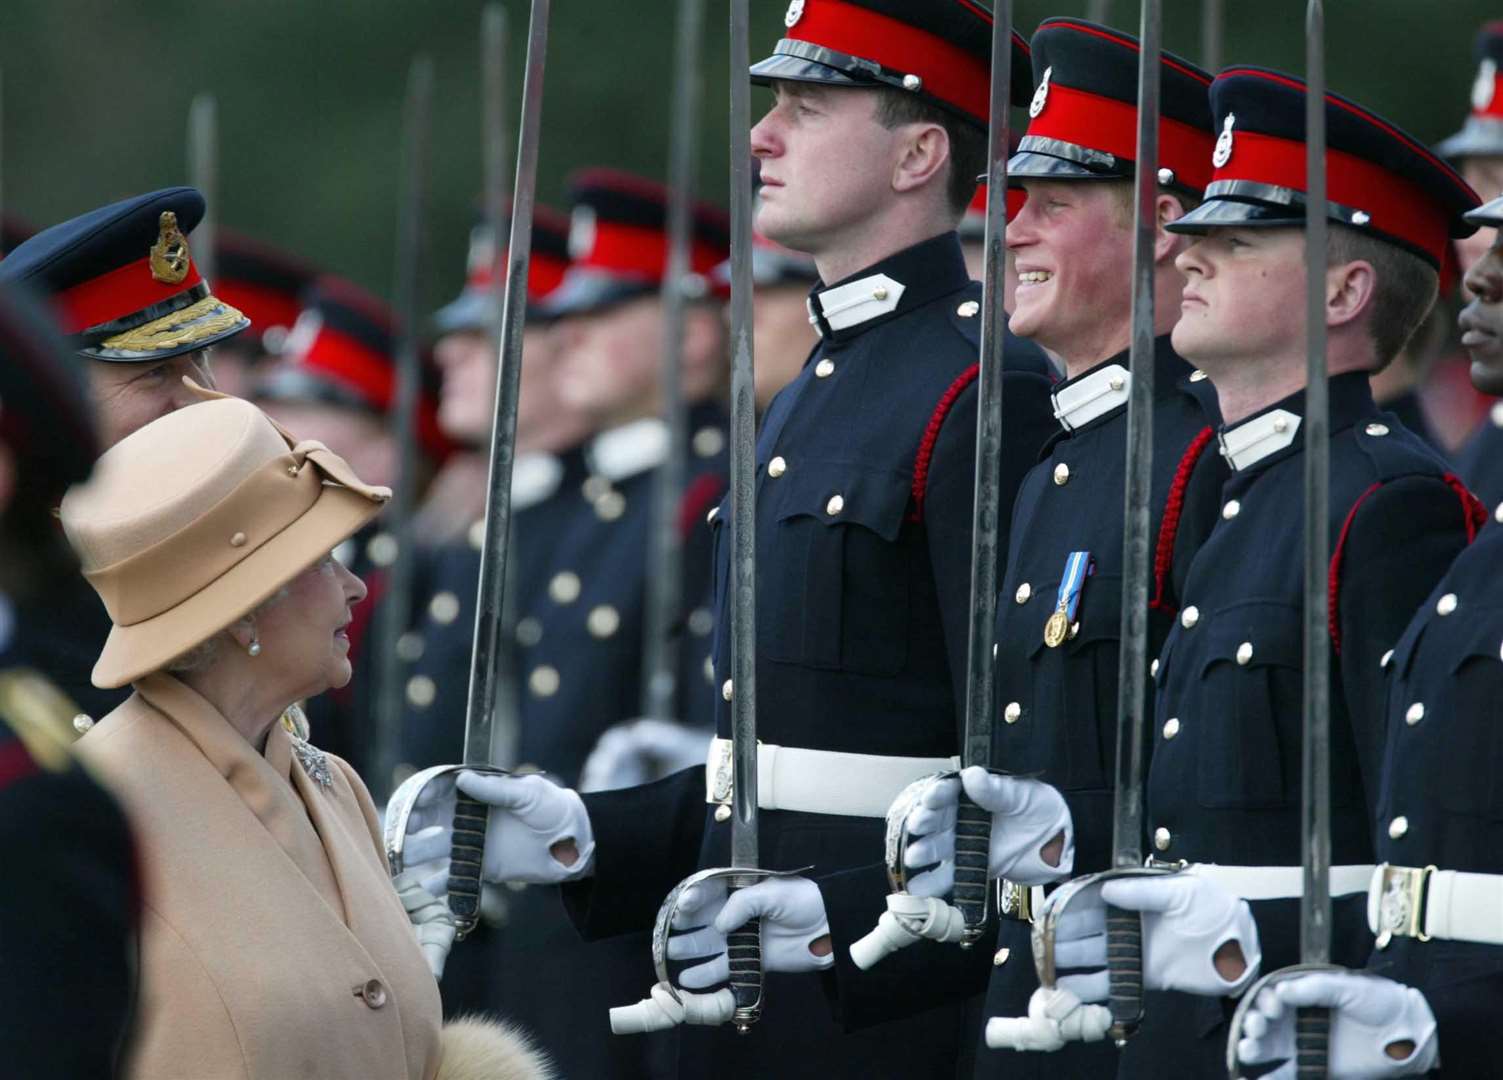 Harry smiles as his grandmother, the Queen, reviews him and other officers during the Sovereign’s Parade at the Royal Military Academy Sandhurst (James Vellacott/PA)